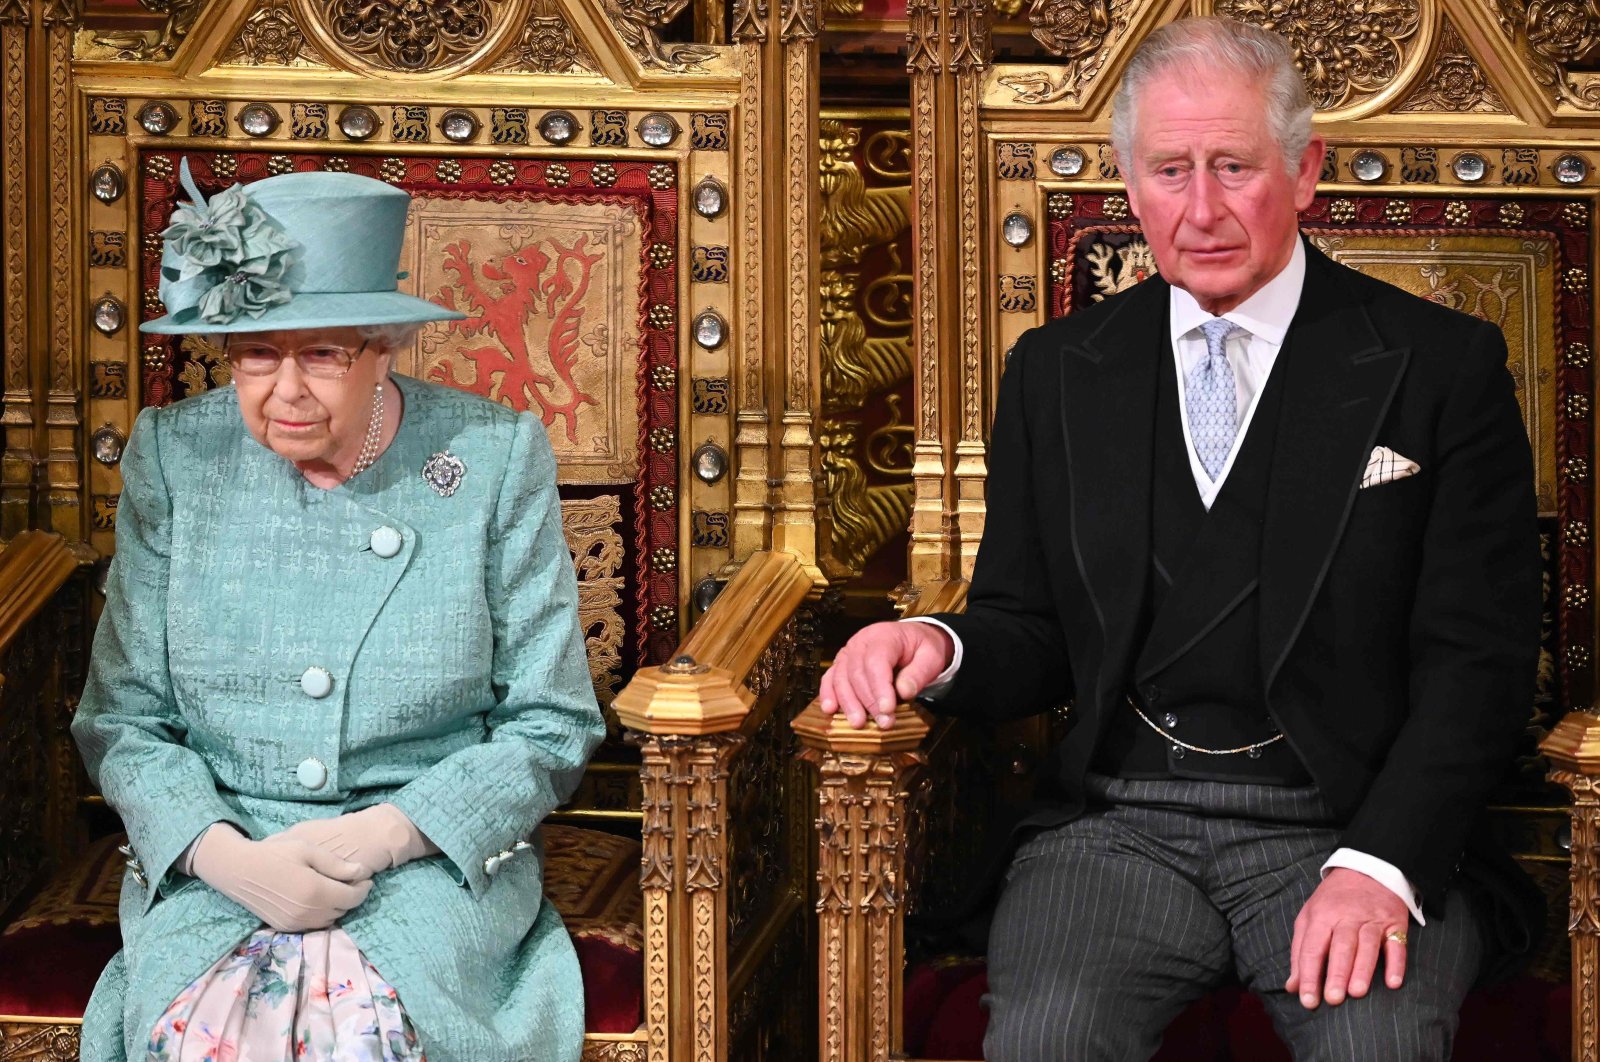 Britain's Prince Charles sits with Queen Elizabeth II on the Sovereign's Throne before she delivered the Queen's Speech in the House of Lords chamber, during the state opening of Parliament in the Houses of Parliament, London, Dec. 19, 2019. (AFP Photo)